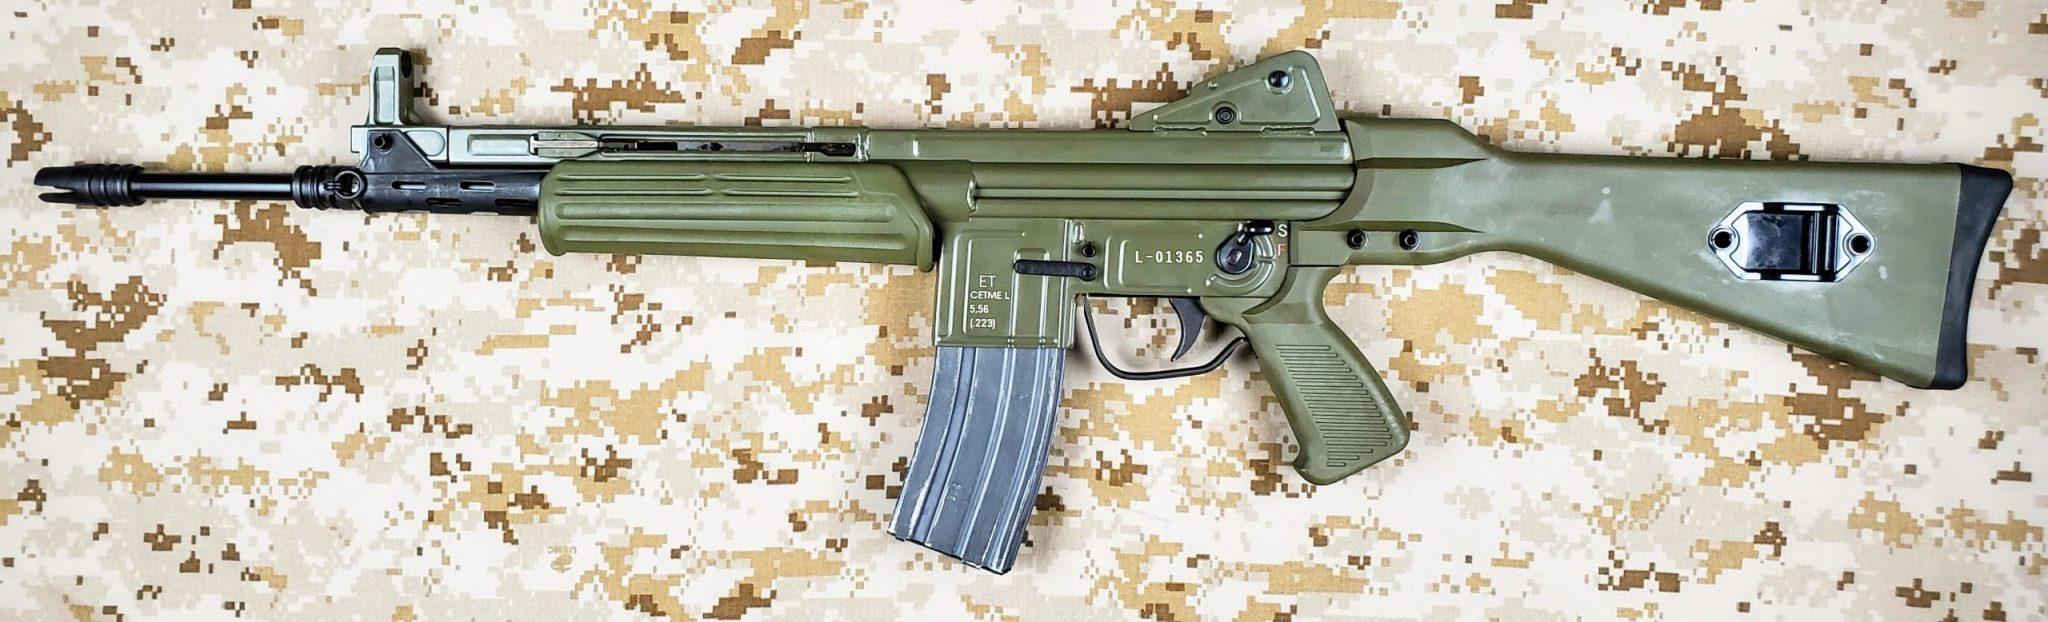 CETME Model L was Spanish assault rifle chambered in 5.56 mm caliber